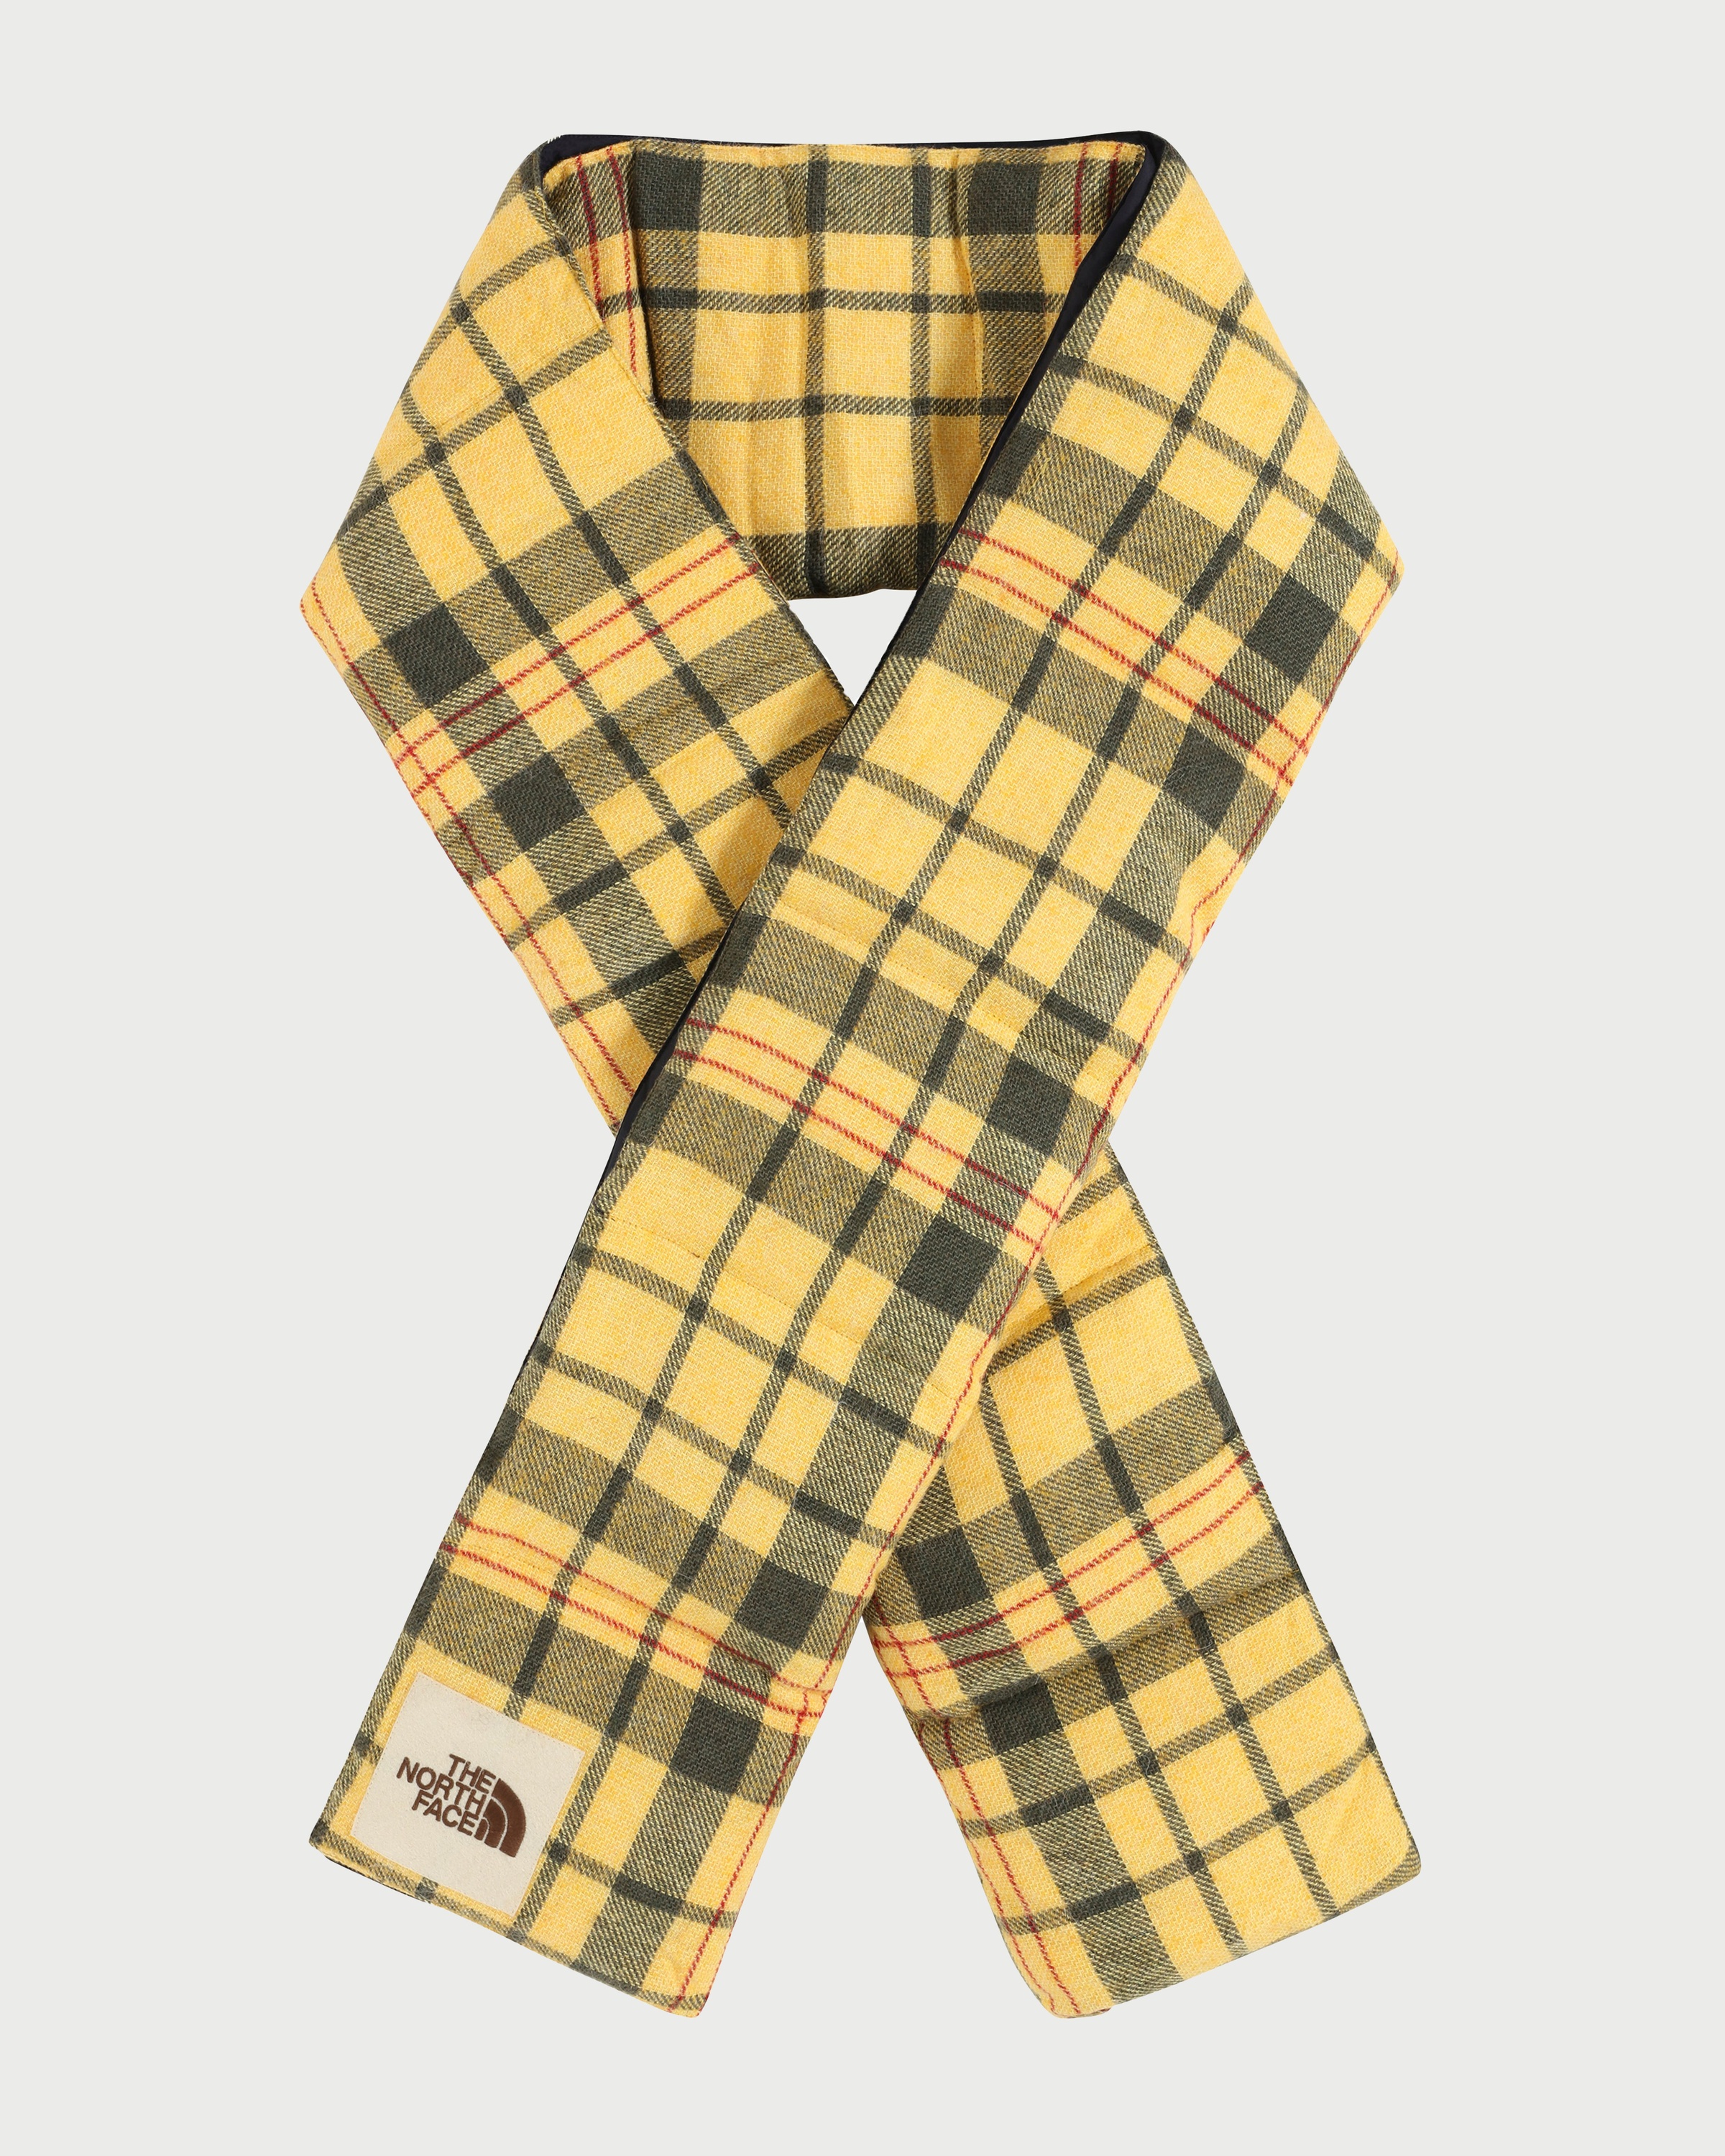 The North Face – Brown Label Insulated Scarf Summer Gold Heritage Unisex - Knits - Yellow - Image 1